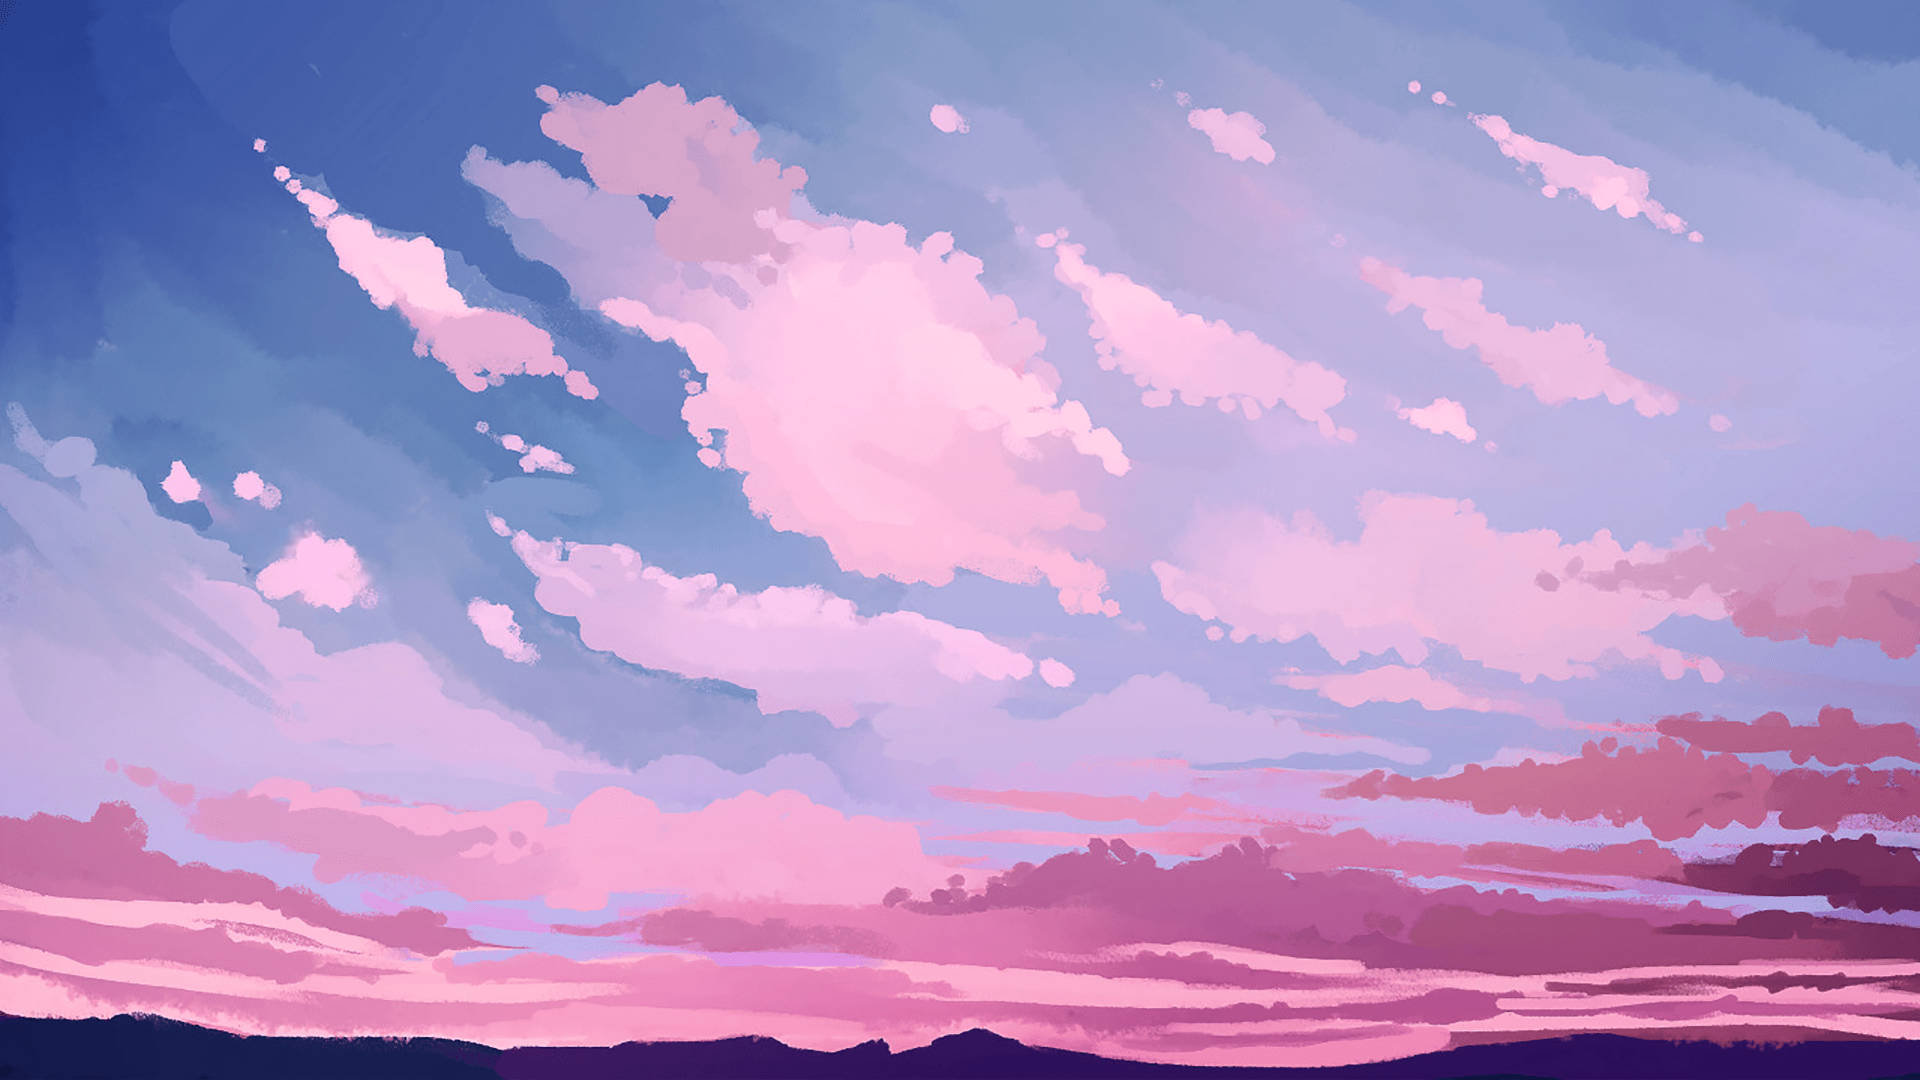 Light Pink Aesthetic Clouds Wallpaper